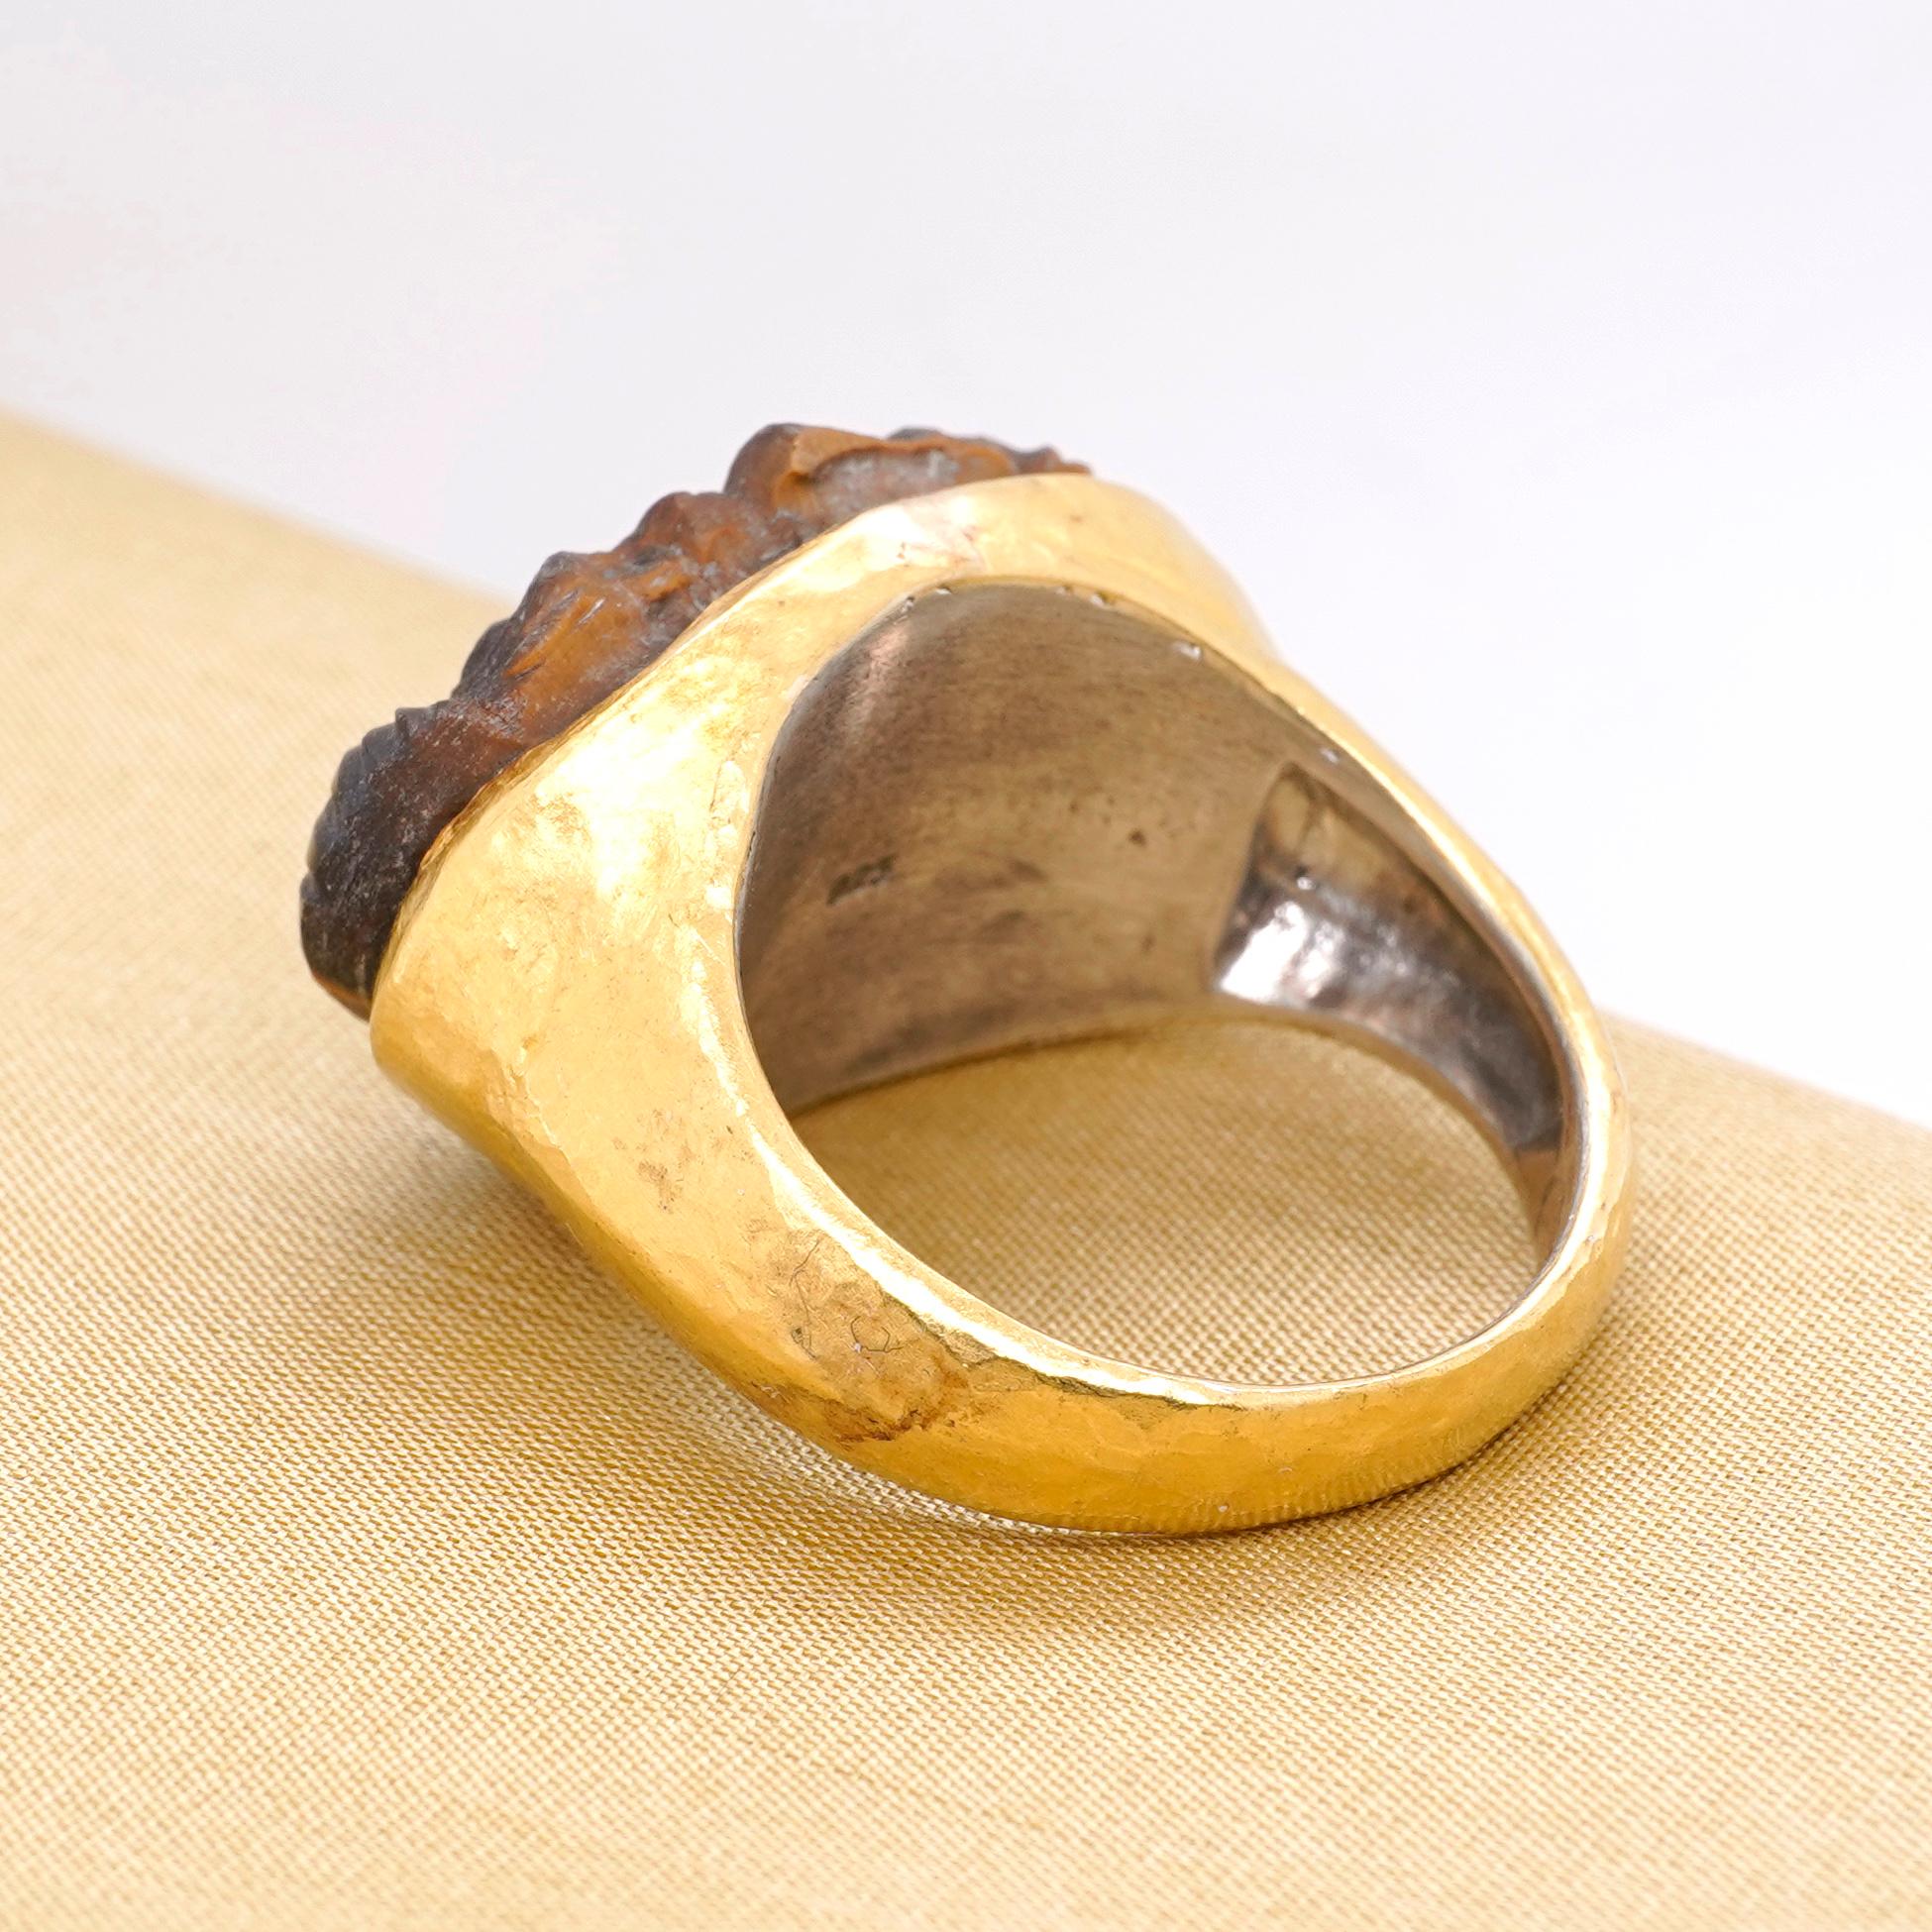 Oval Cut 27 Carat Carved Zeus Face Tiger's Eye Statement Ring, 24k Yellow Gold & Sterling